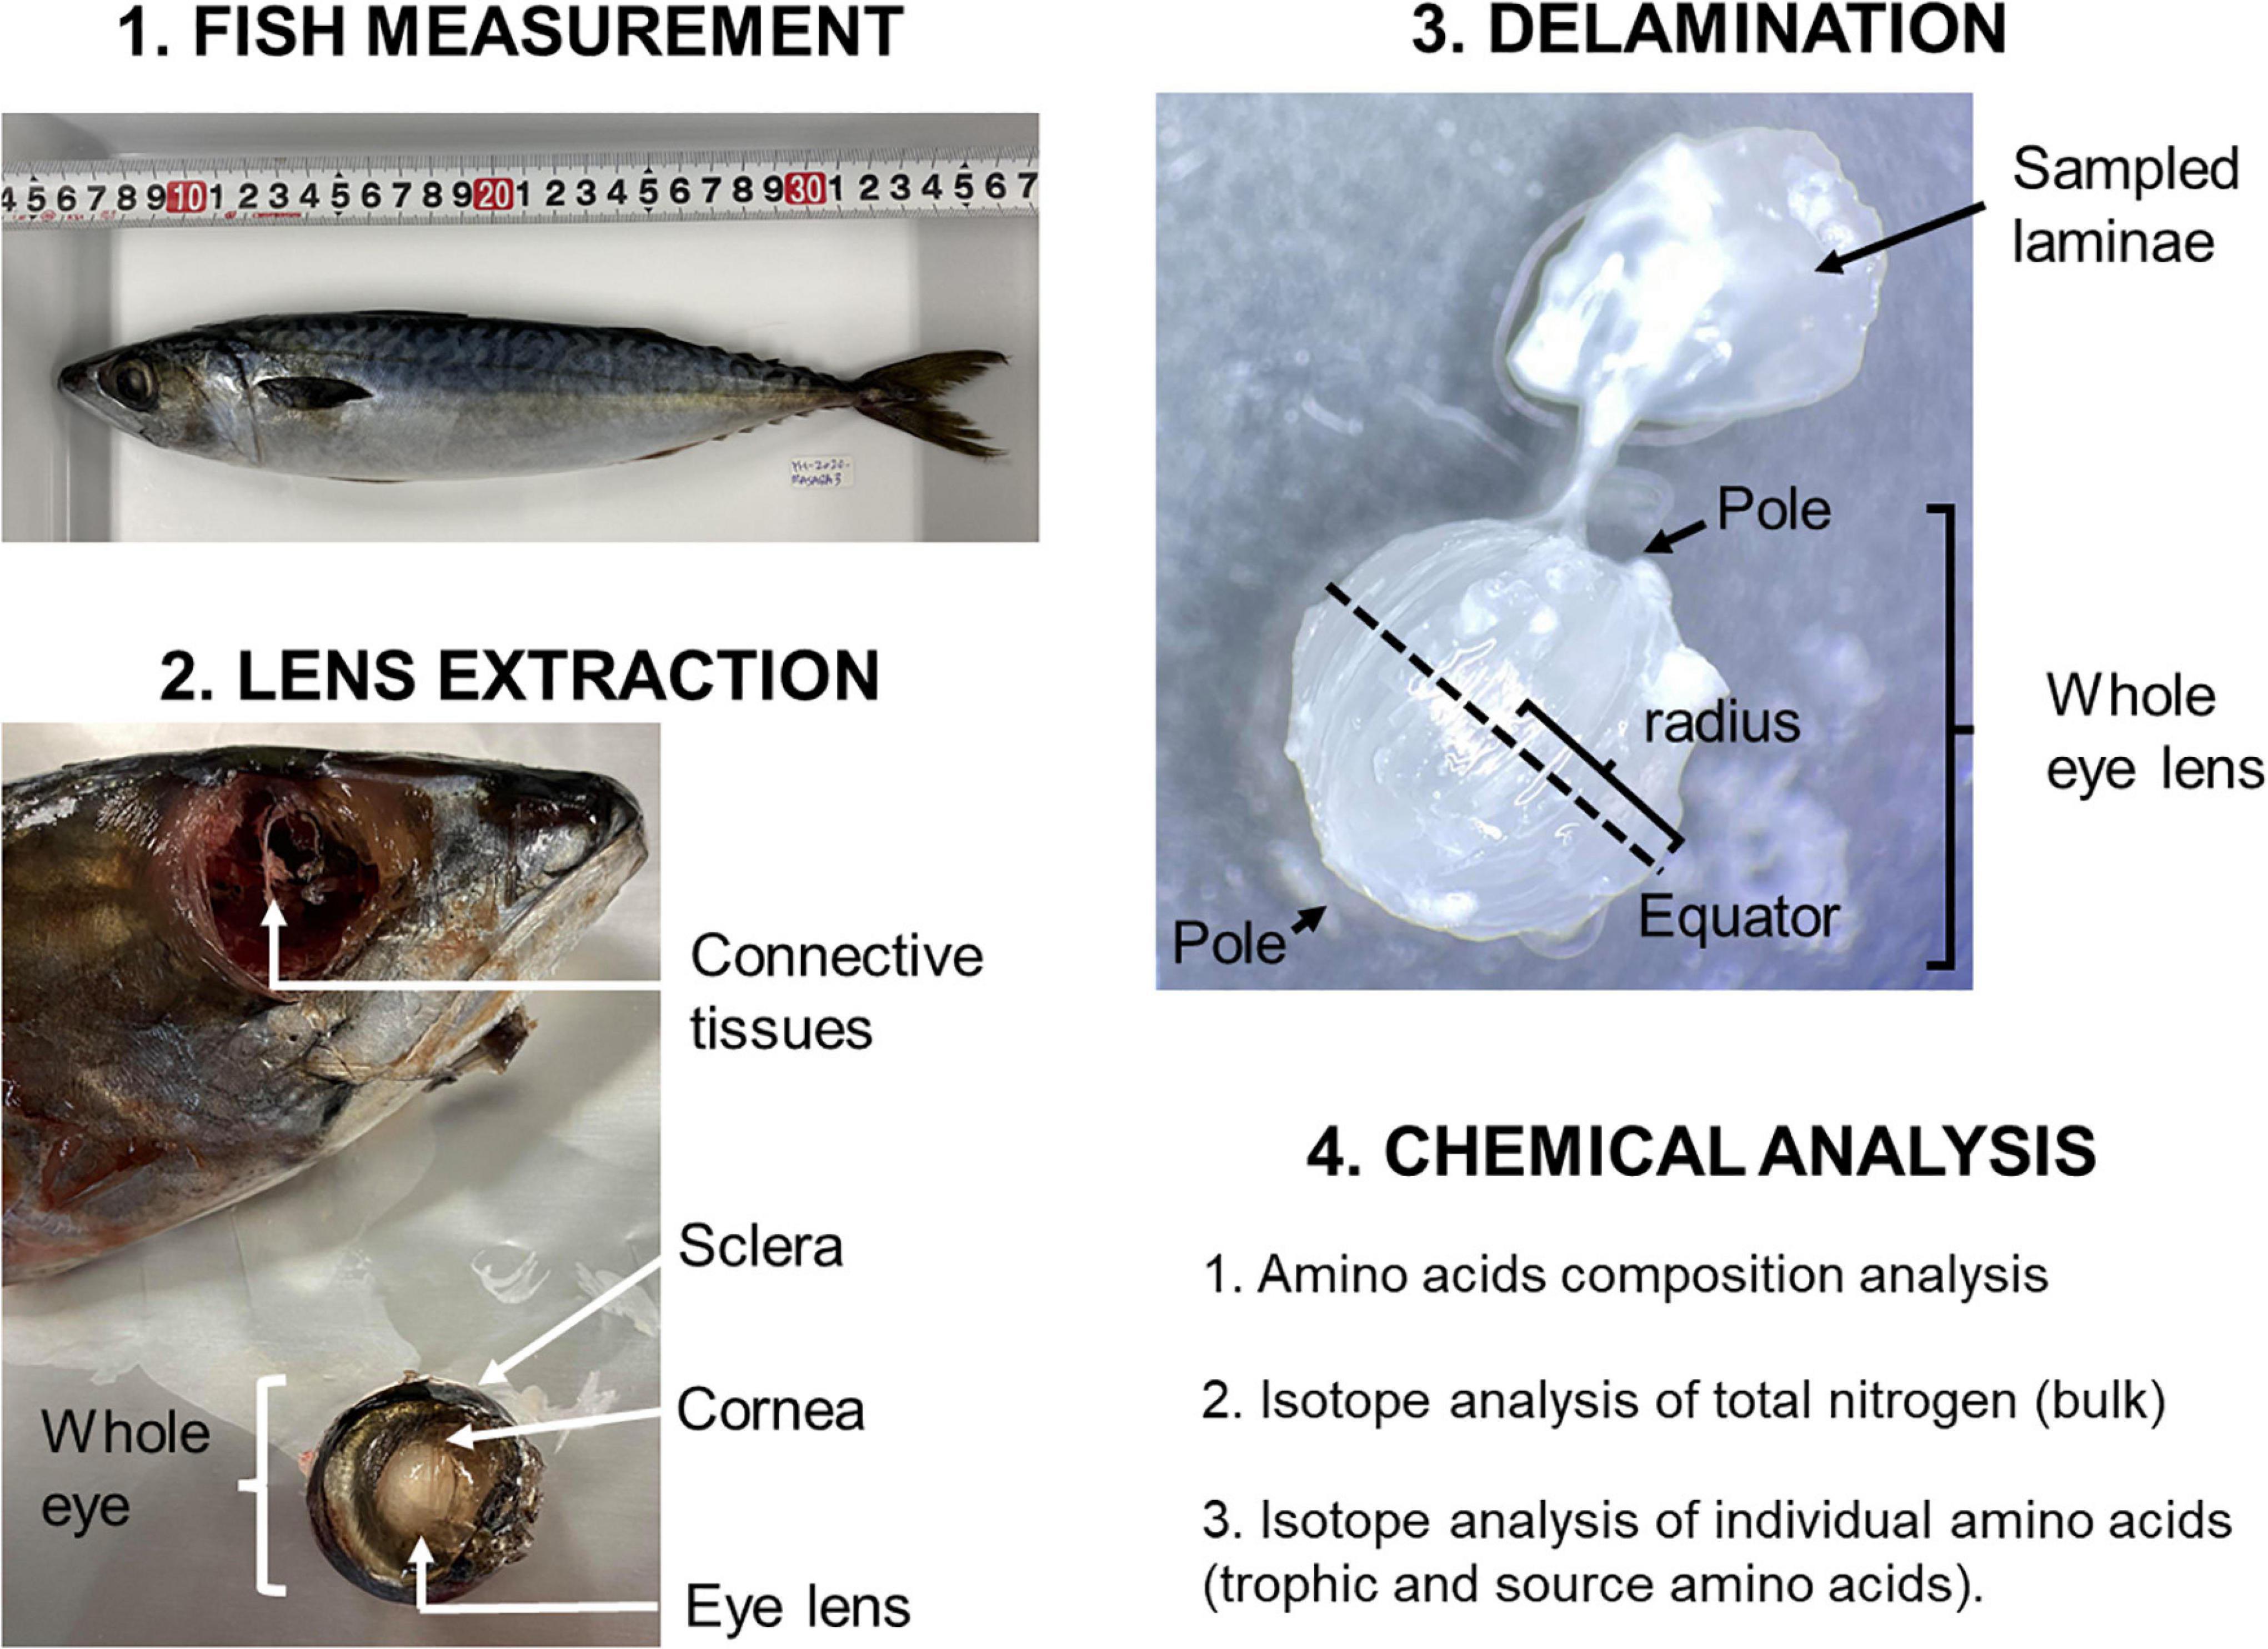 Frontiers  Compound-Specific Nitrogen Isotope Analysis of Amino Acids in  Eye Lenses as a New Tool to Reconstruct the Geographic and Trophic  Histories of Fish